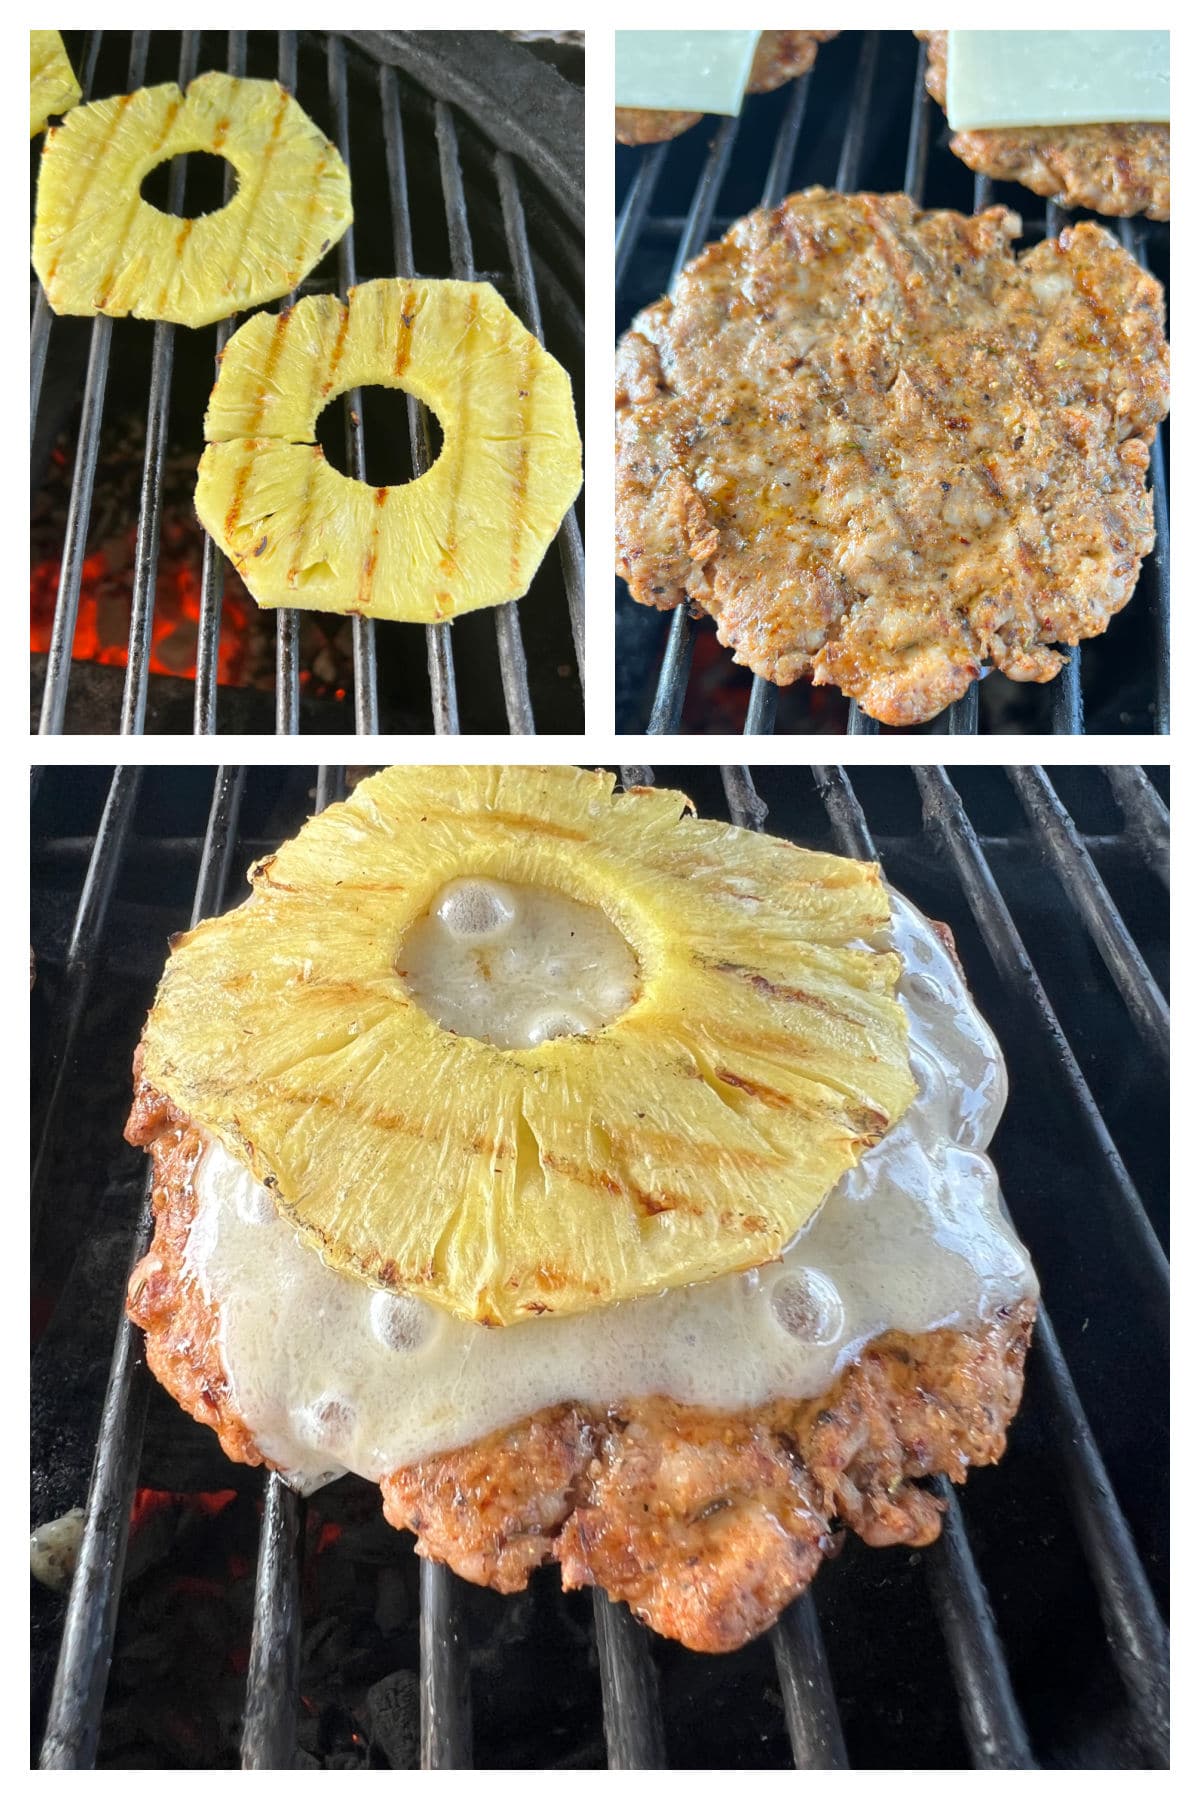 Collage: grilling pineapple rings, pork burgers, with cheese & pineapple.